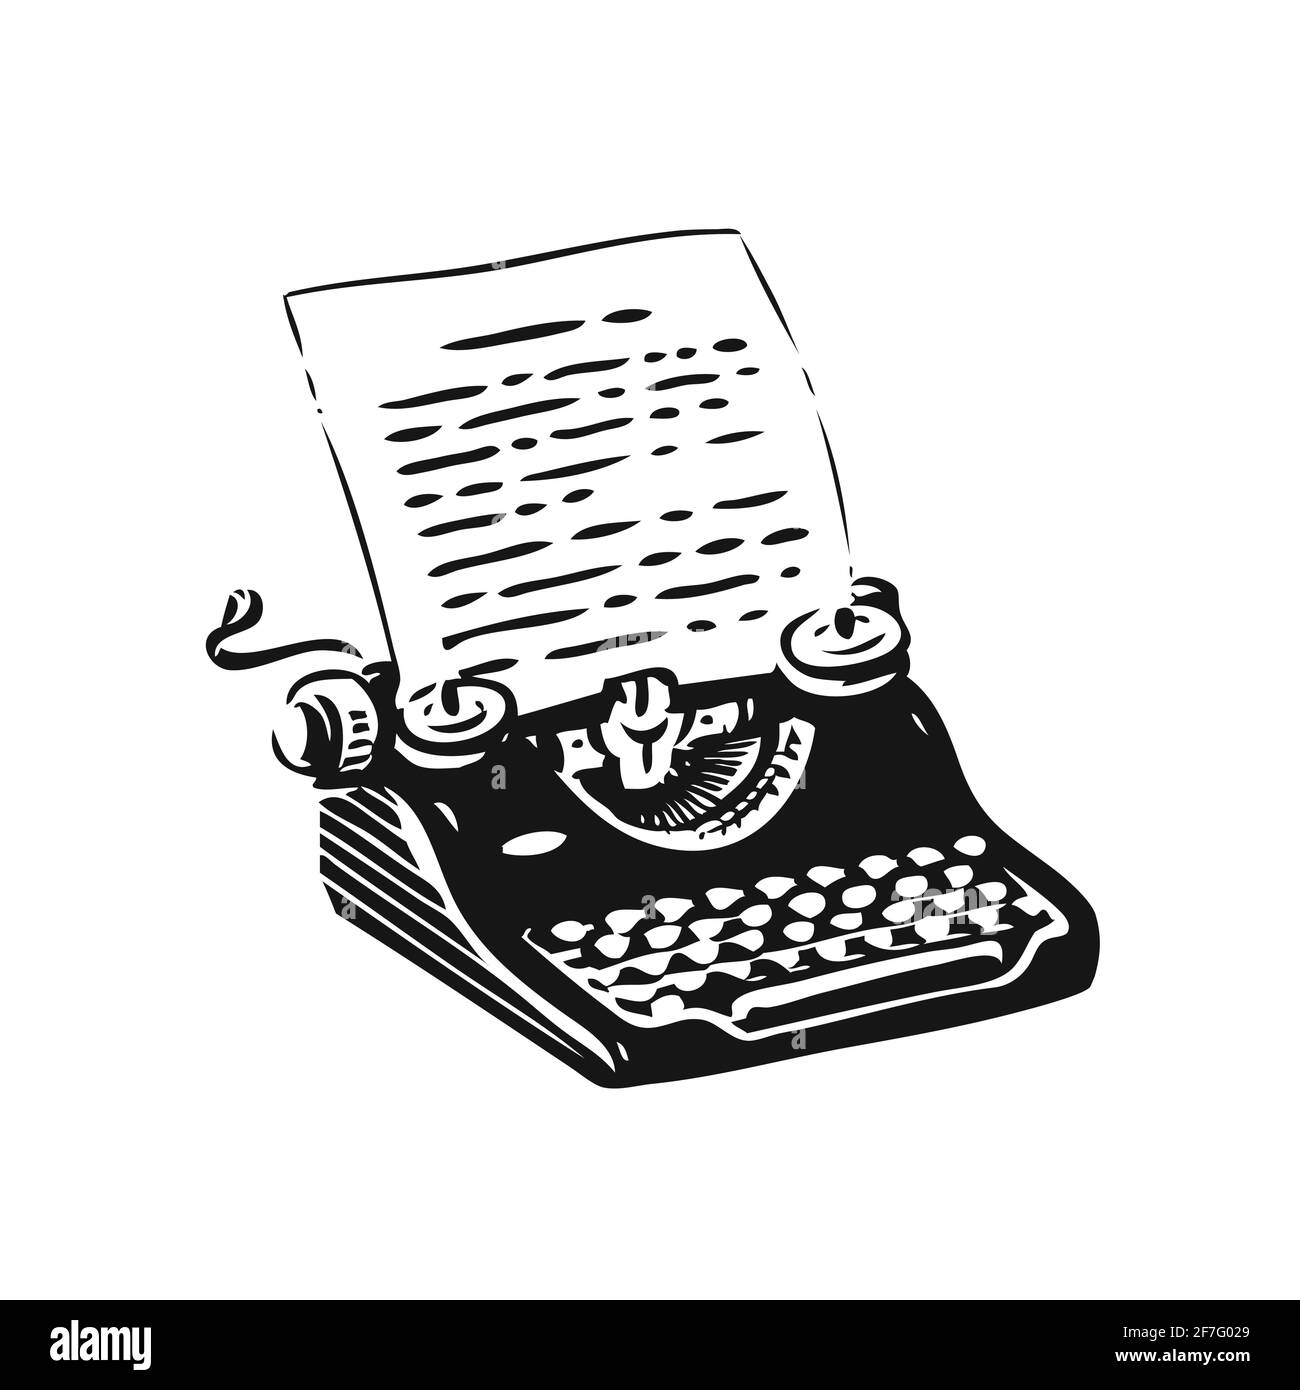 Vintage type writer with paper typing machine Vector Image